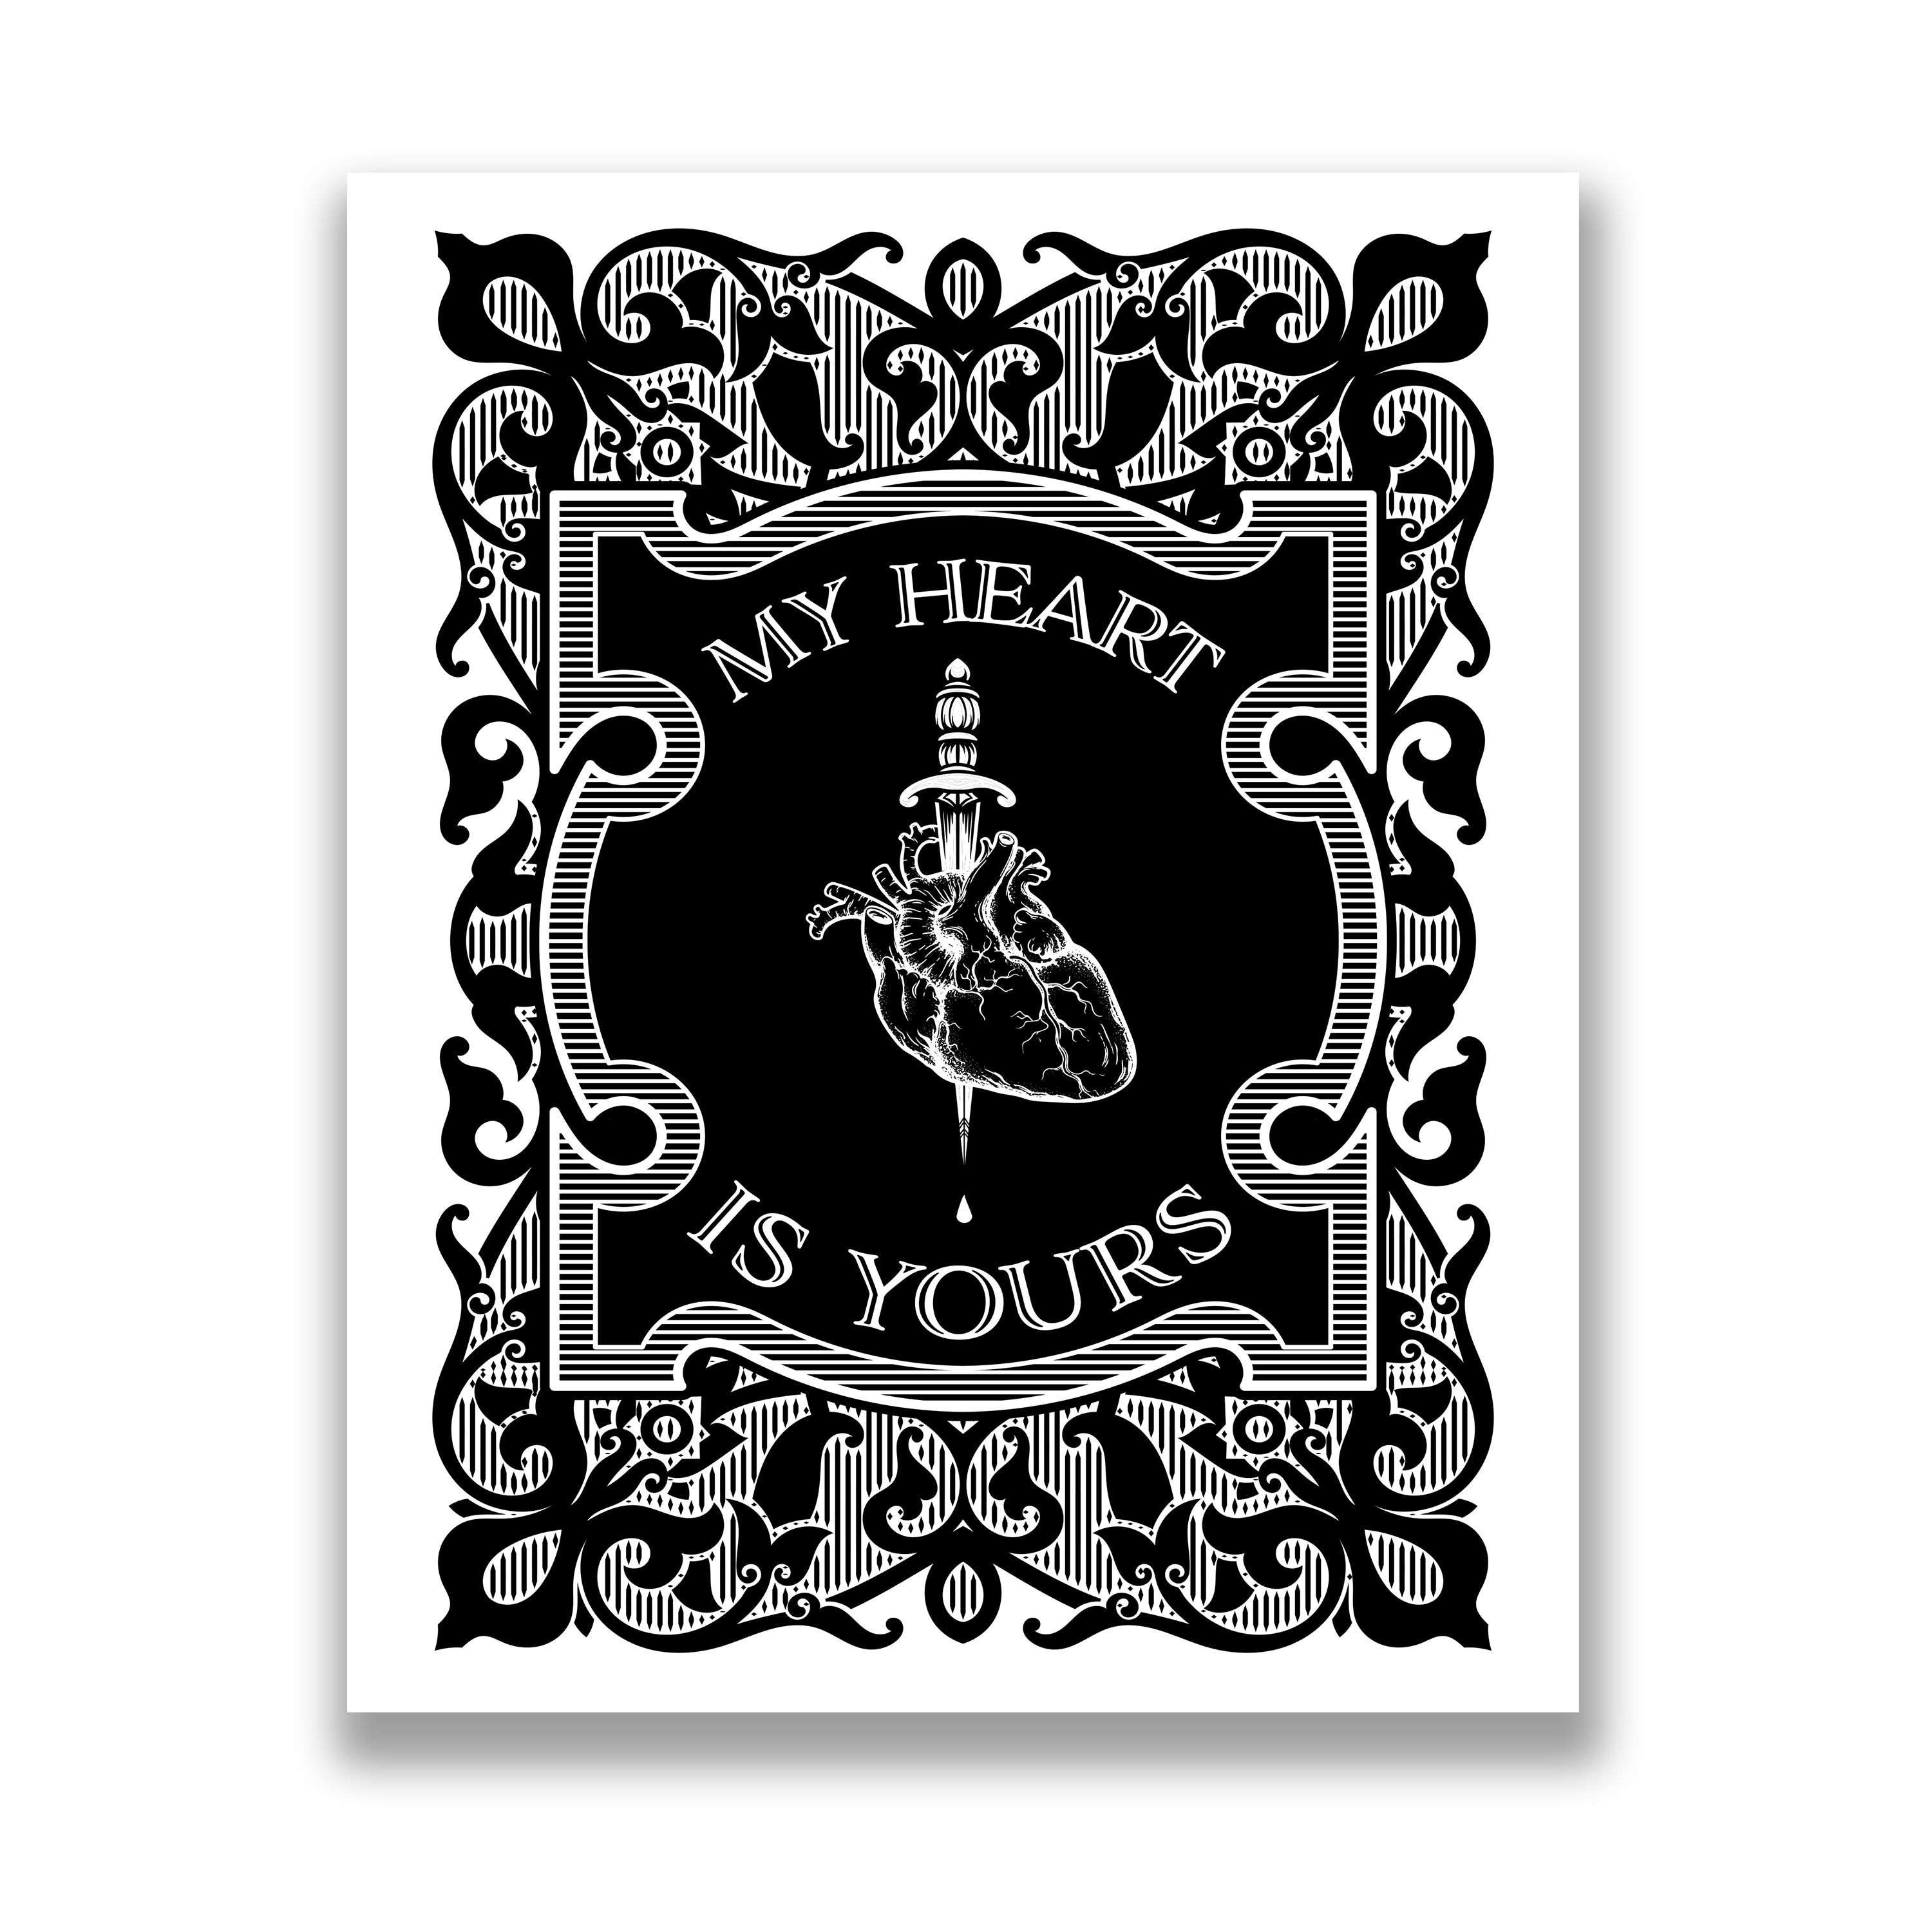 My Heart Is Yours Print - Black Edition by The Blackened Teeth gothic home decor